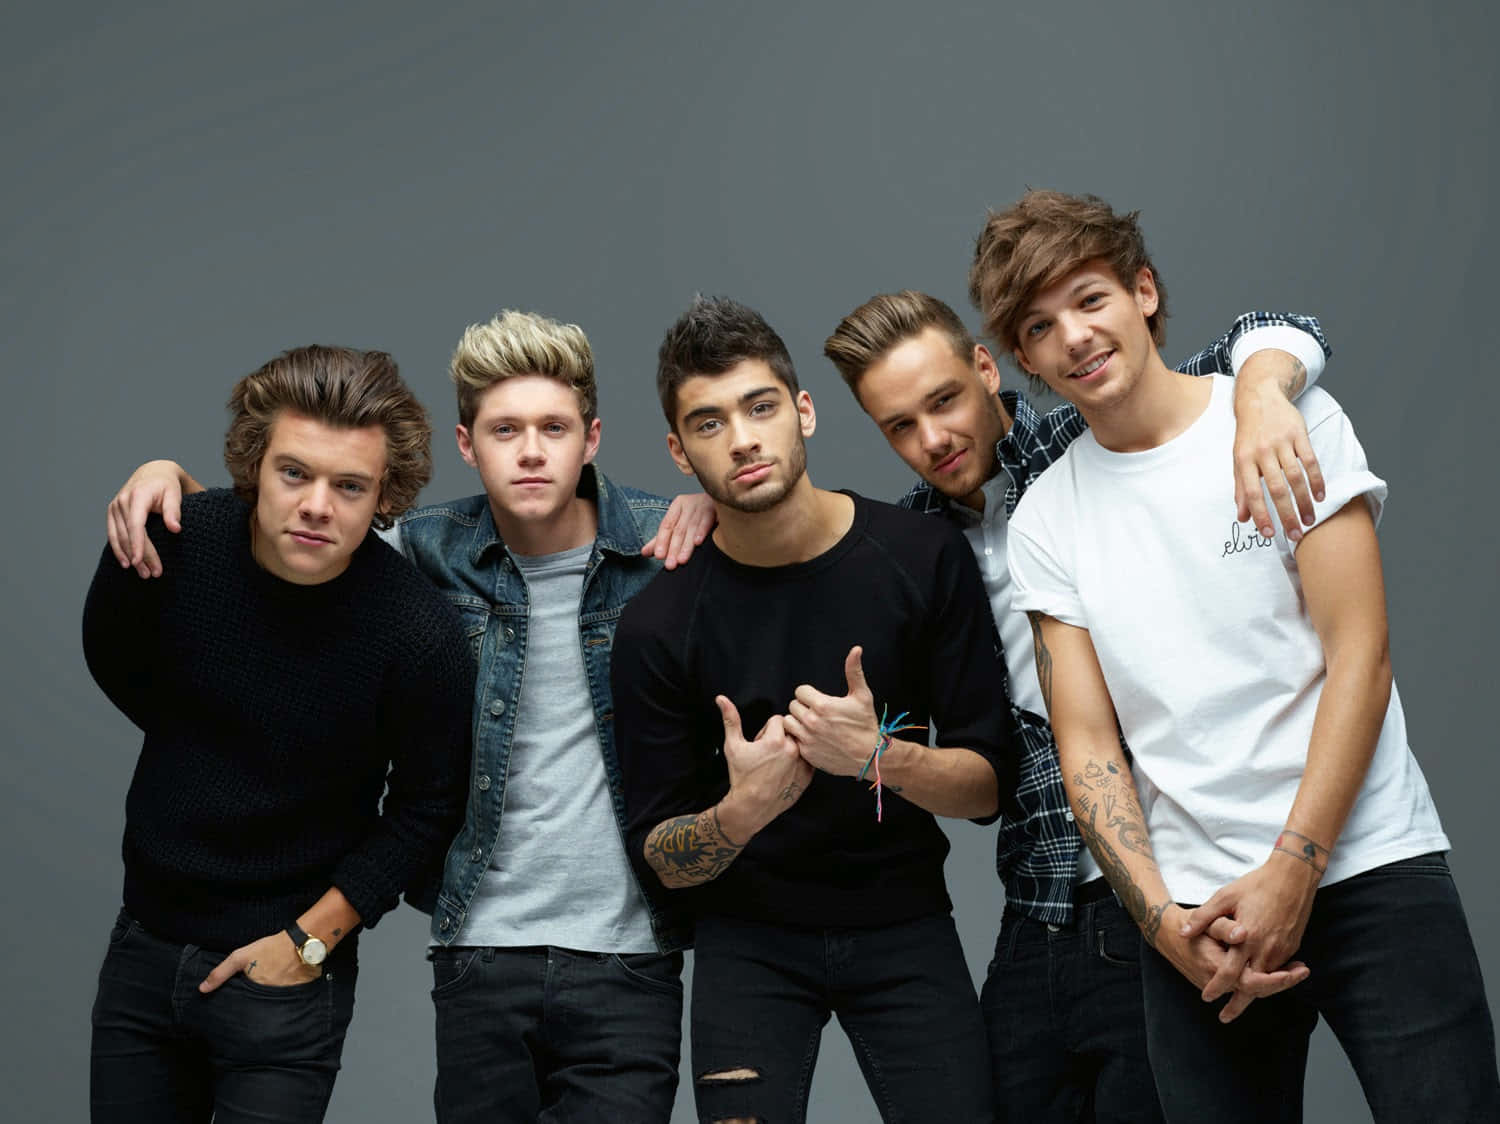 Download The members of One Direction shine! | Wallpapers.com